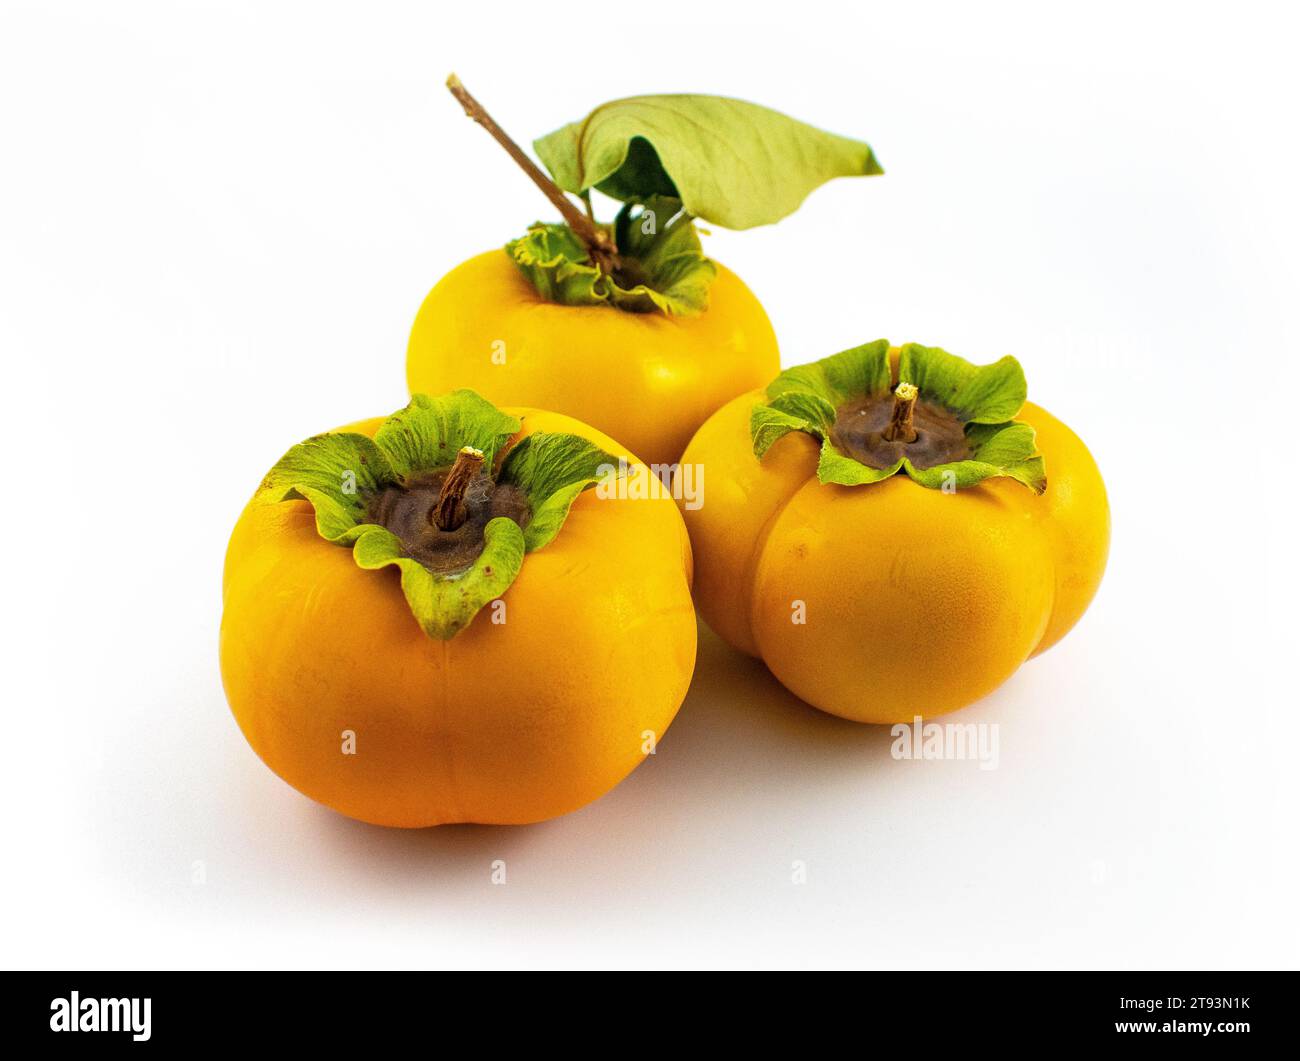 Photo of a ripe fuyu Asian persimmon with leaves and stem intact Stock Photo